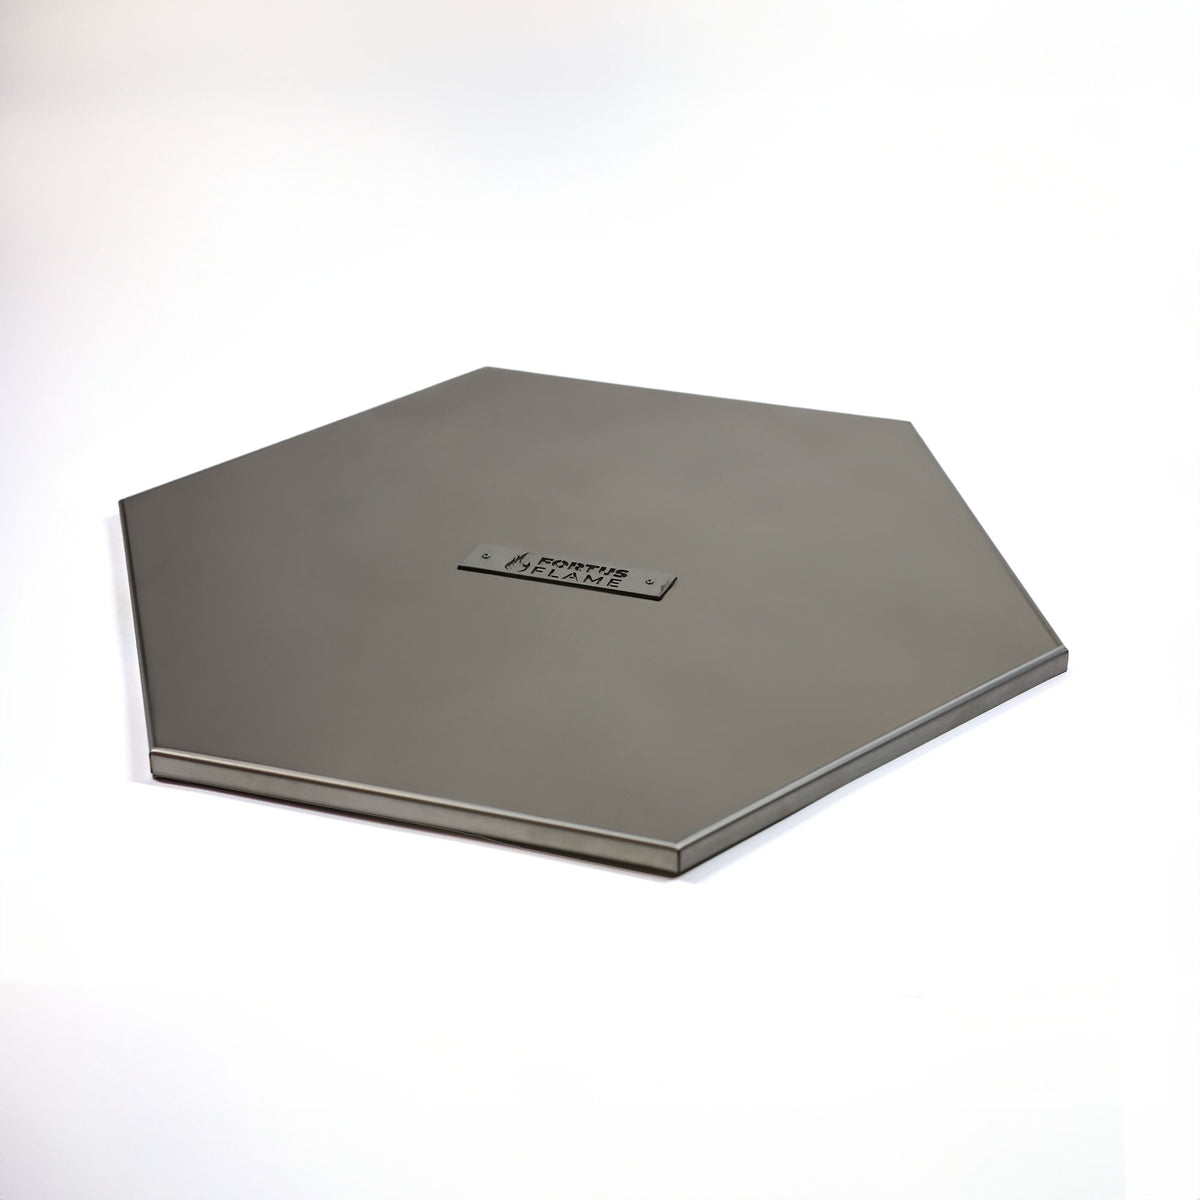 The 6 Series Stainless Steel Lid Cover